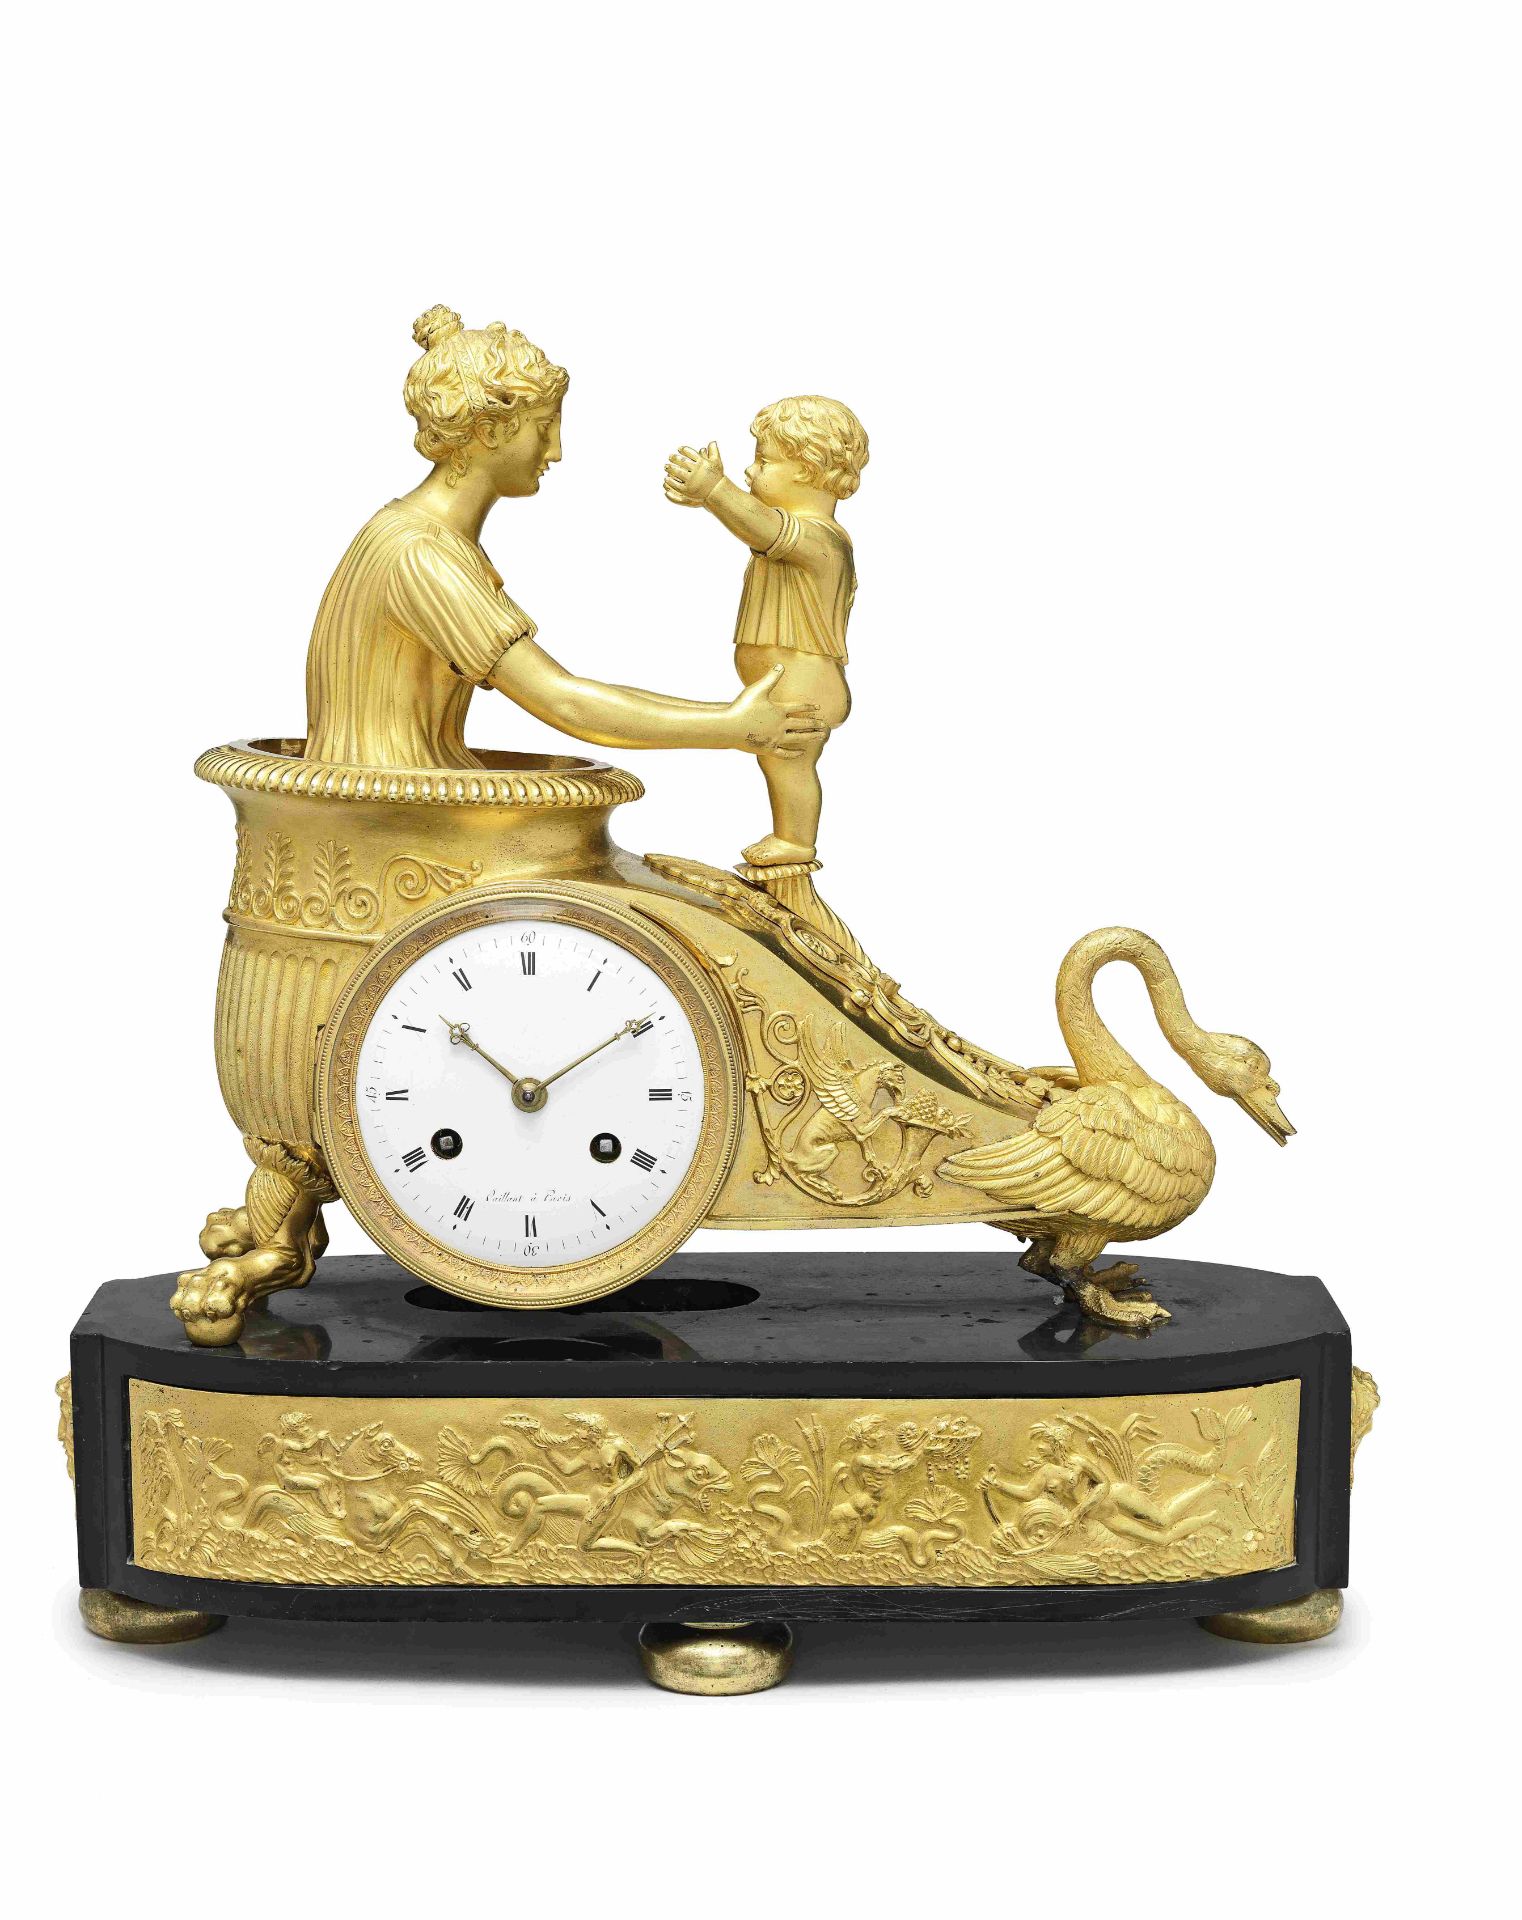 An early 19th century French ormolu and black onyx mantel clock Vaillant a Paris 3